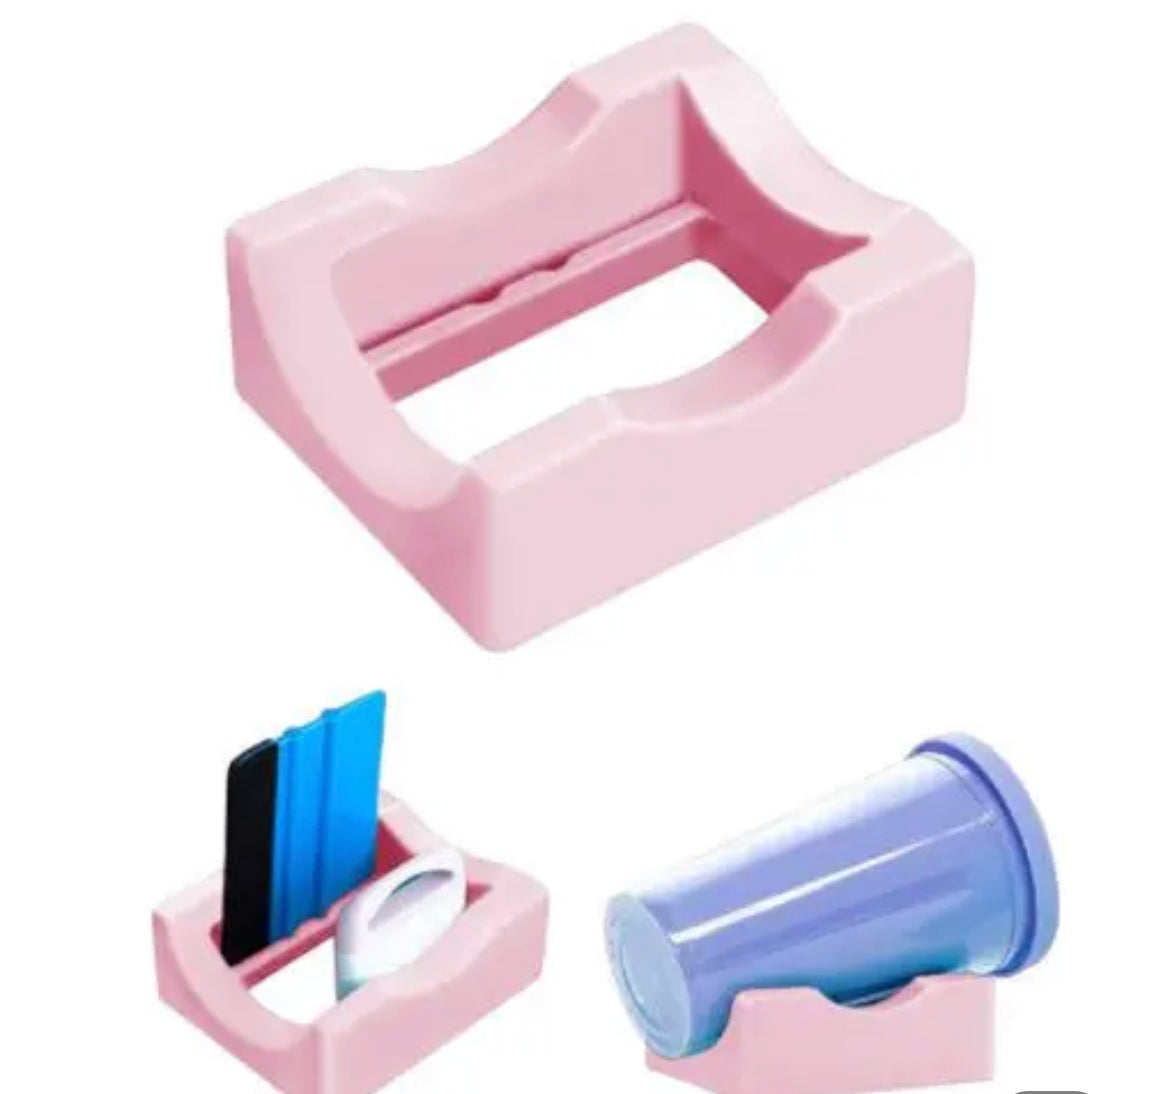 Silicone cup cradle – GQ Blanks and More